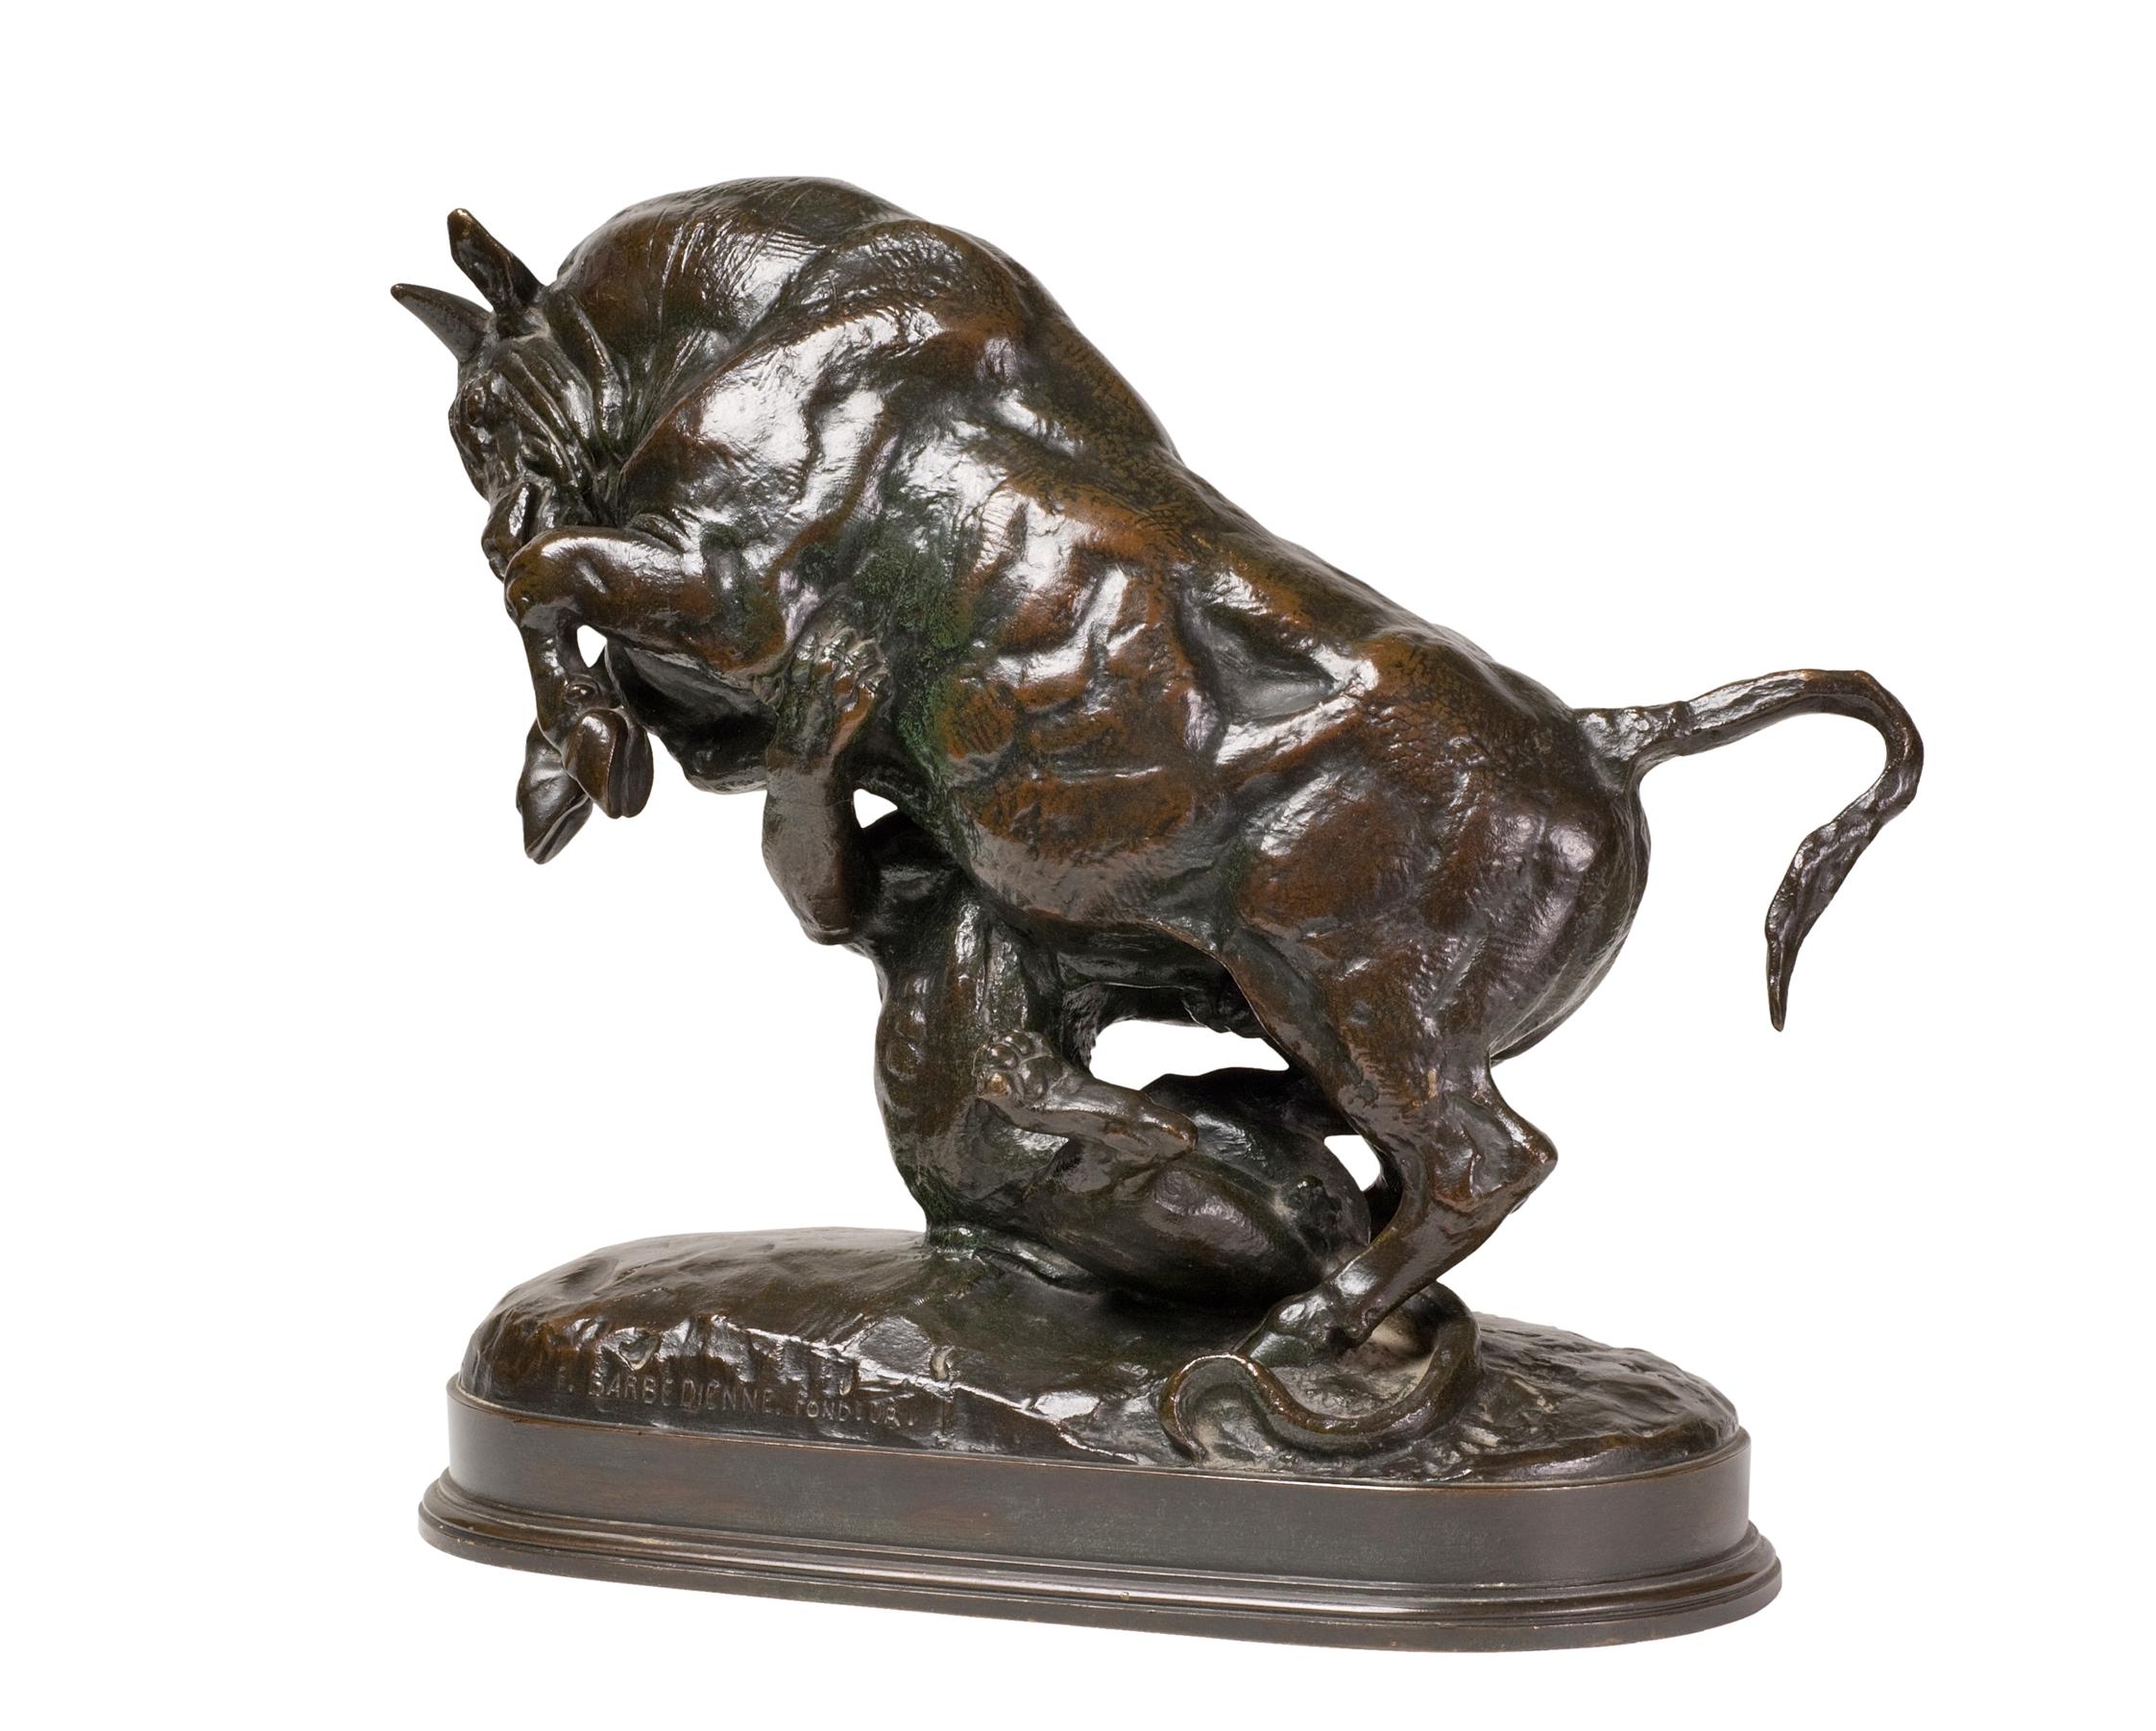 An acute observer of nature Barye was fascinated by the dramatic depiction of animals in the wild. These anomalies bronzes can sit on mantles and desks and elevate a room tremendously.
Modeled 1841-44, Taureau Attaque par un Tigre is a variation for